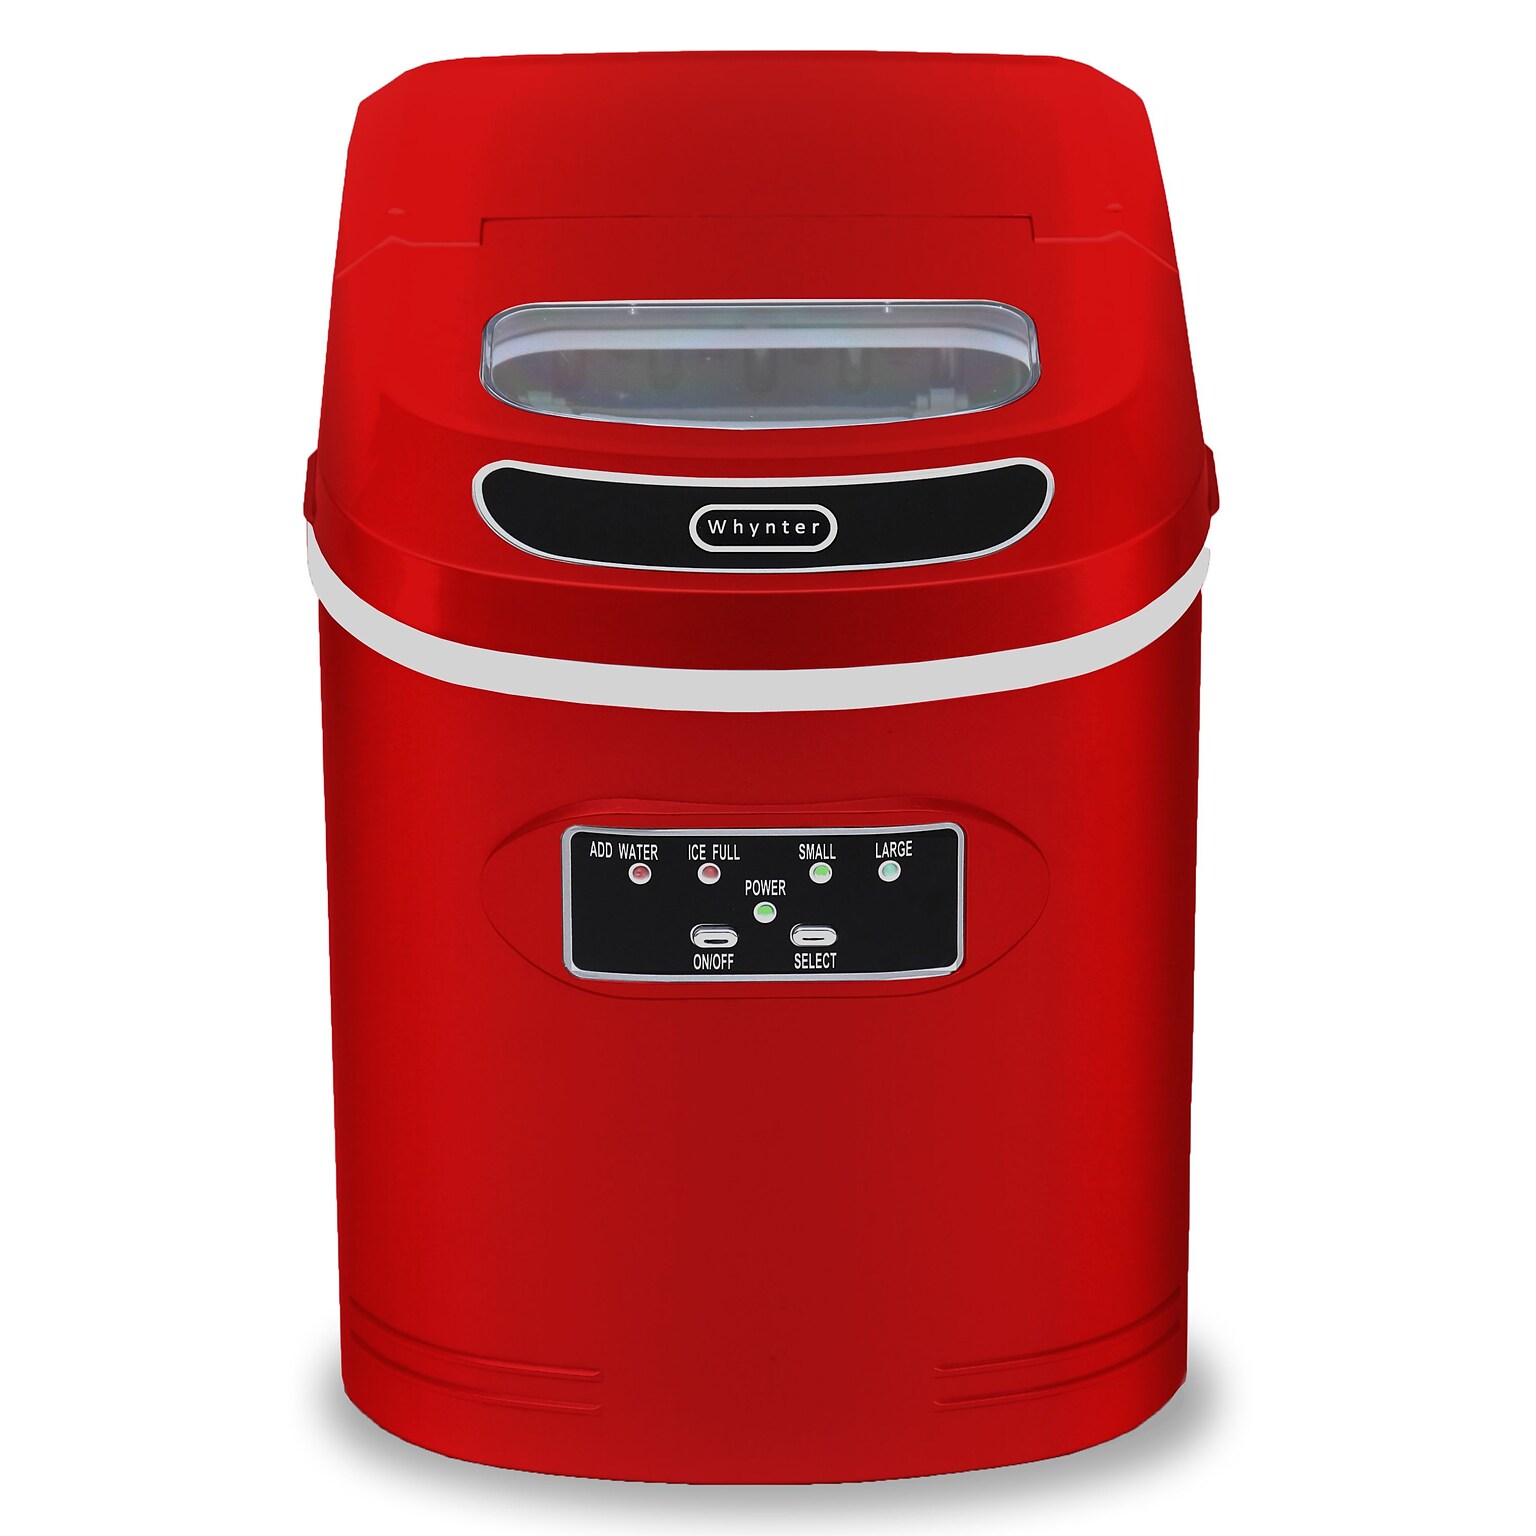 Whynter Compact Portable Ice Maker 27 lb capacity - Red (IMC-270MR)